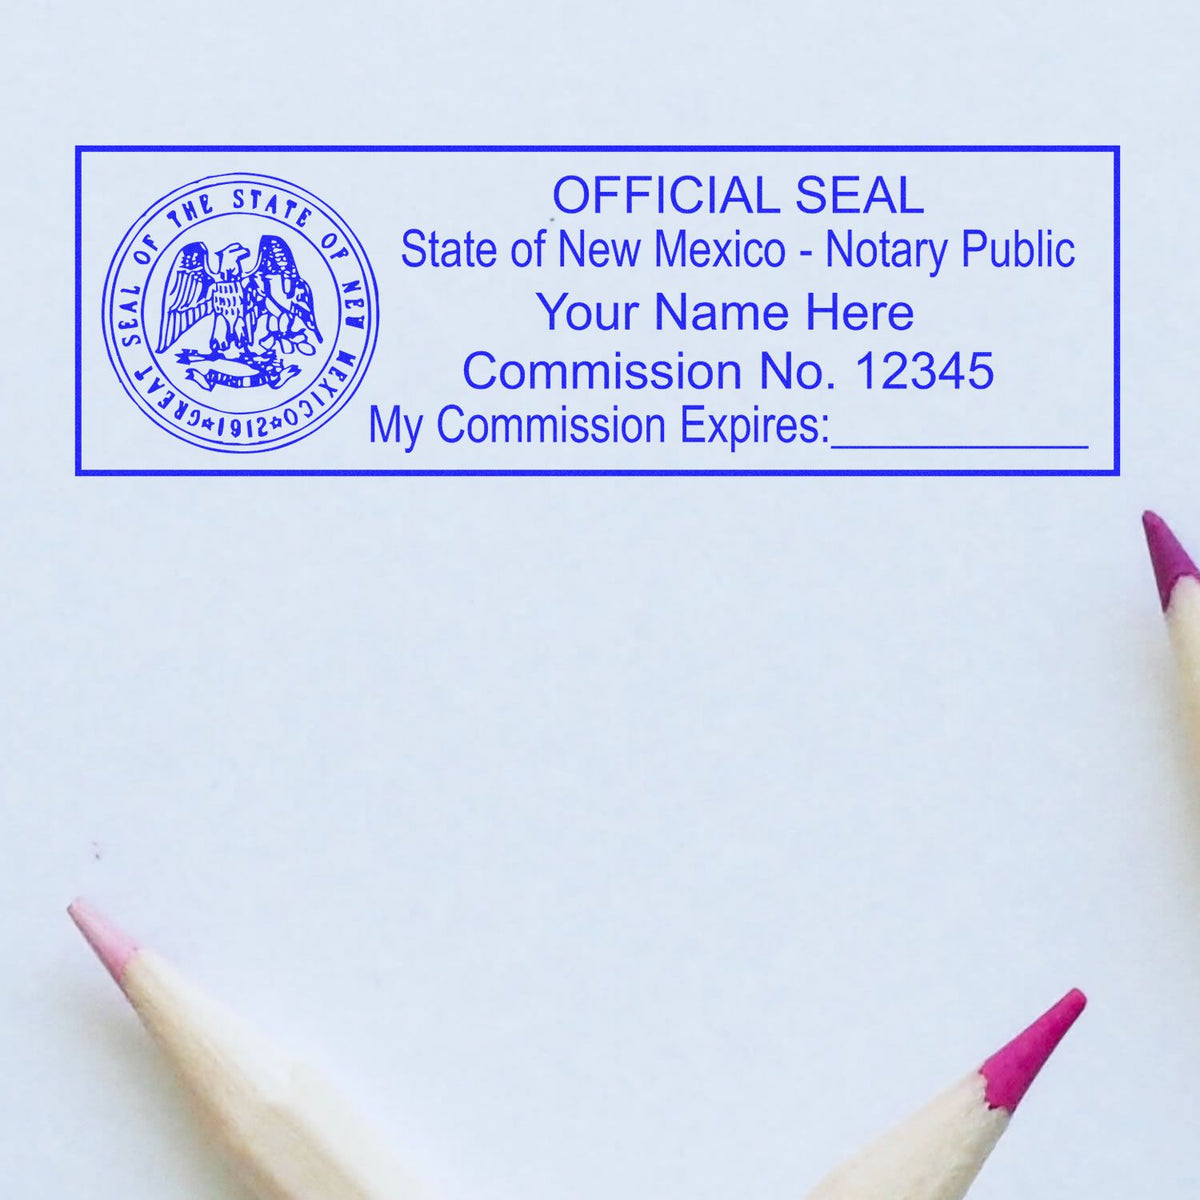 A lifestyle photo showing a stamped image of the Wooden Handle New Mexico State Seal Notary Public Stamp on a piece of paper